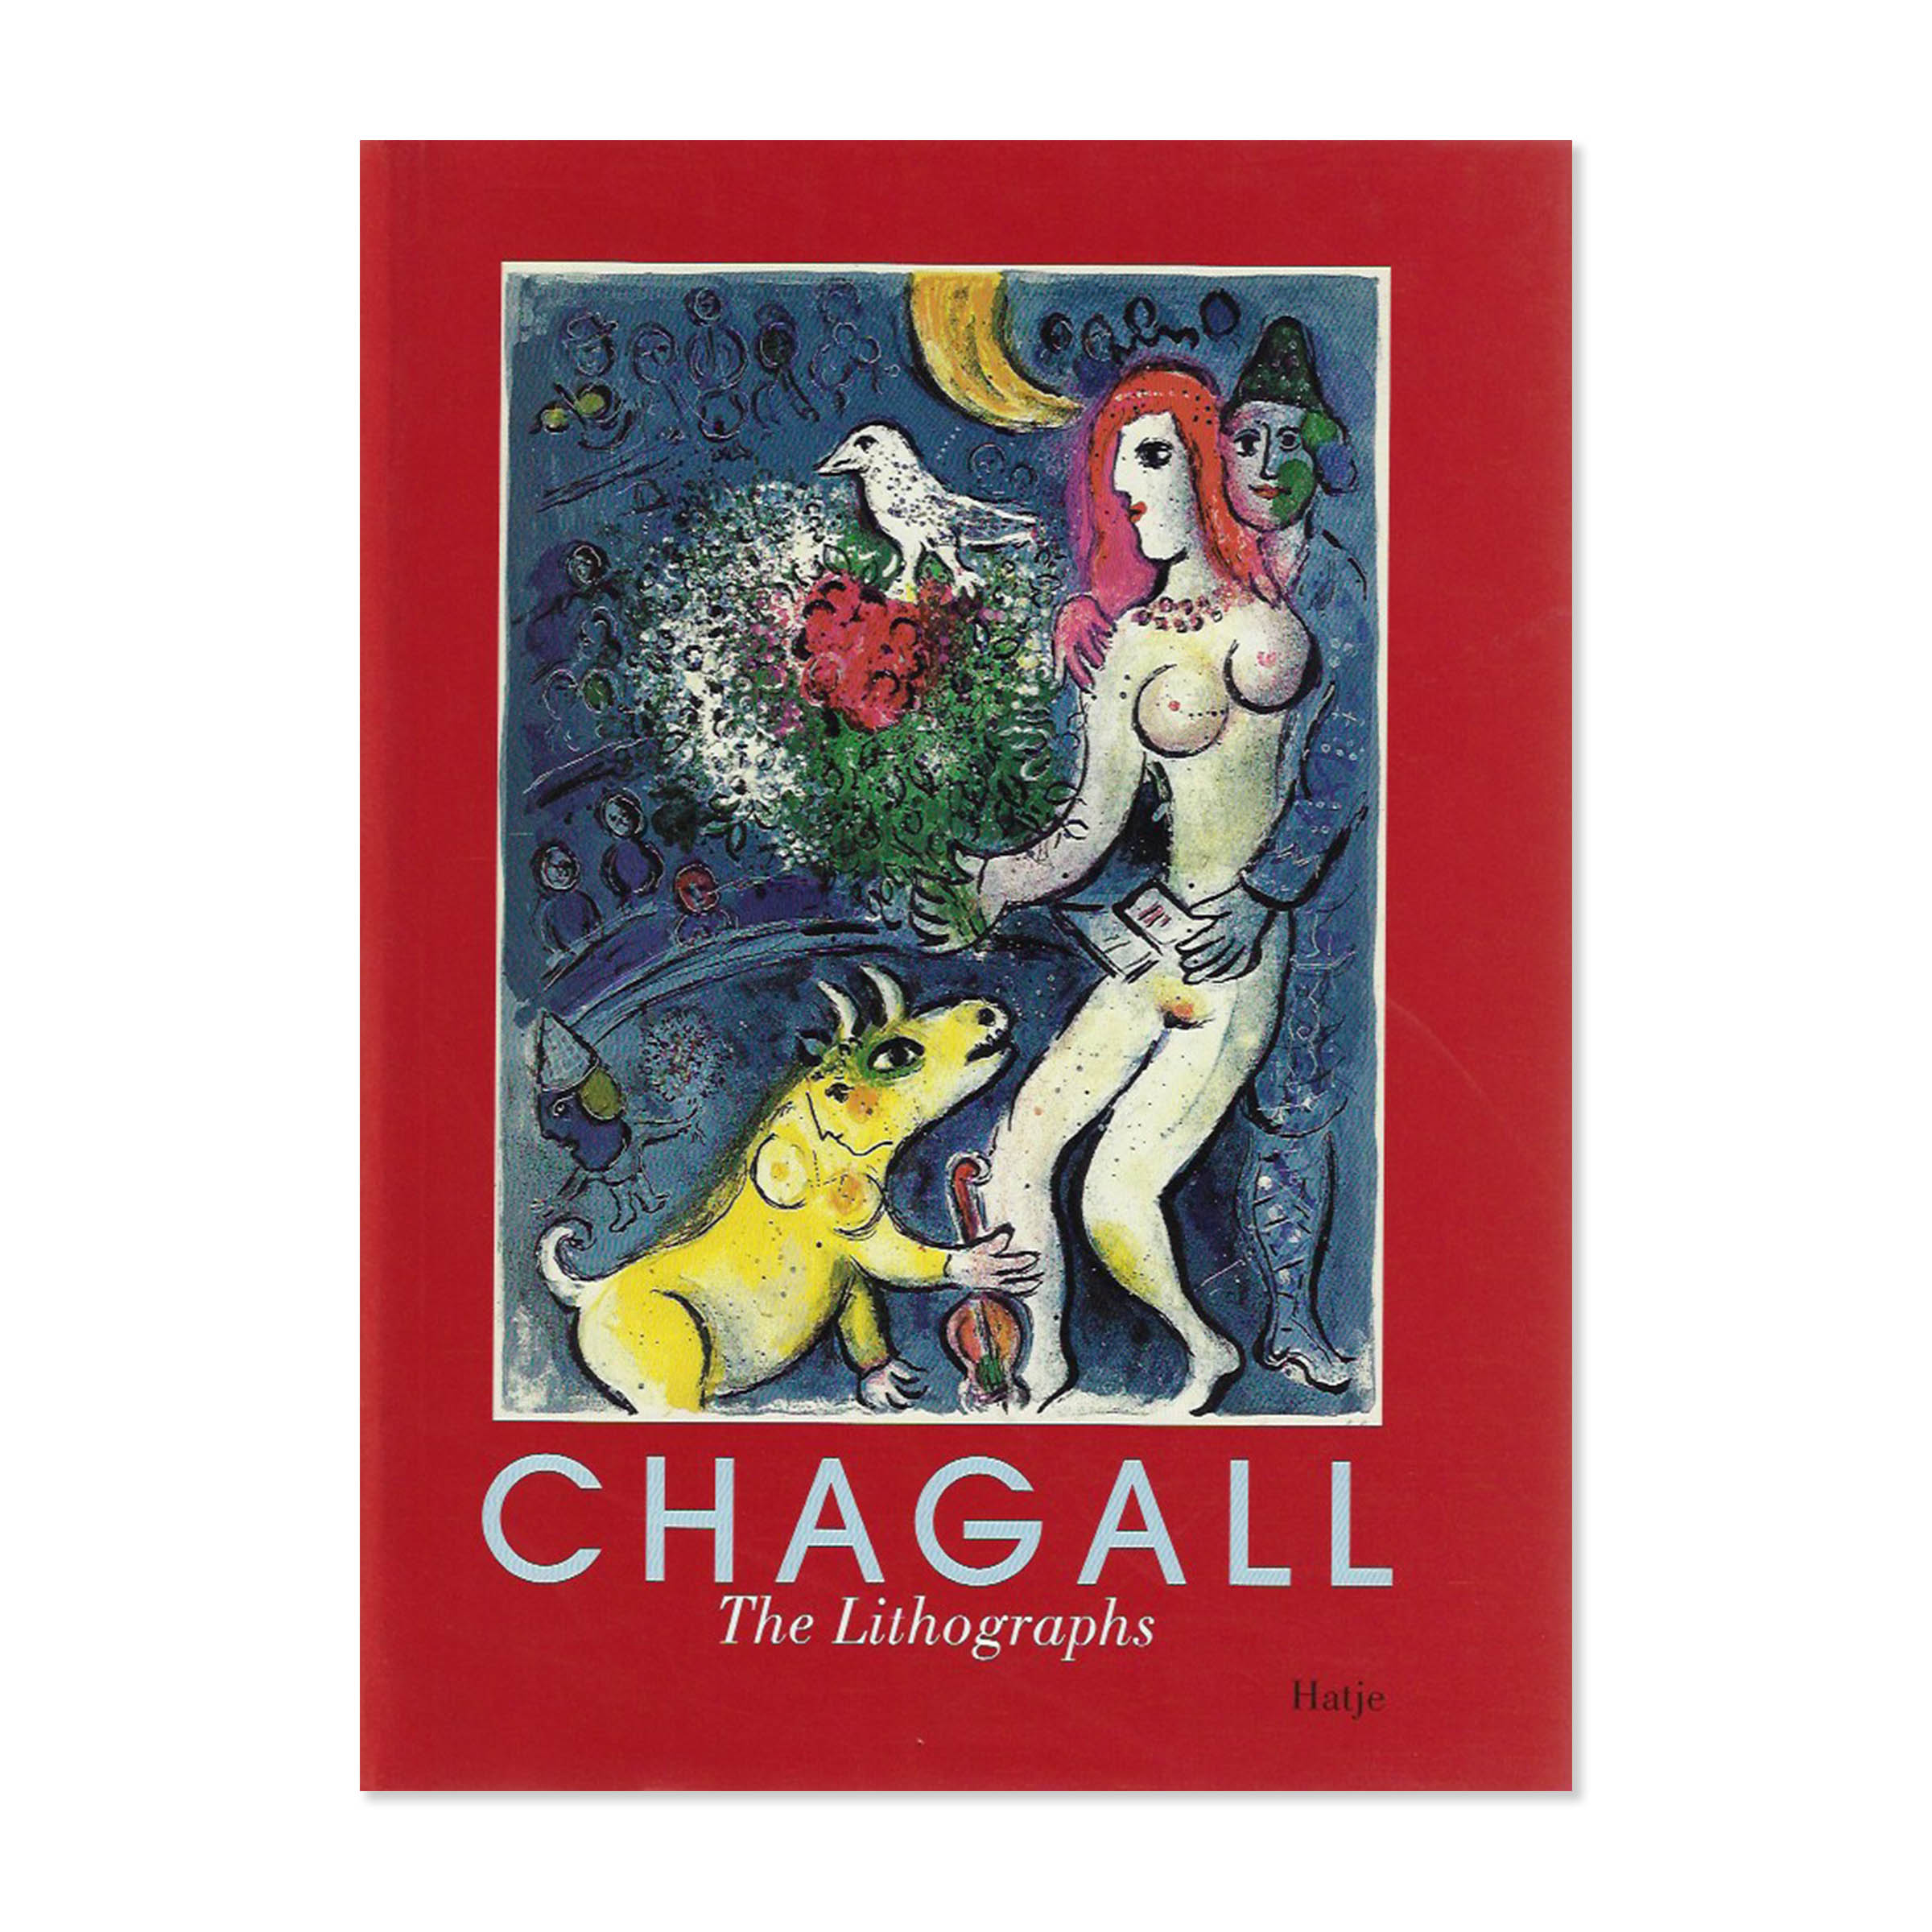 Chagall The lithographs. Cover view